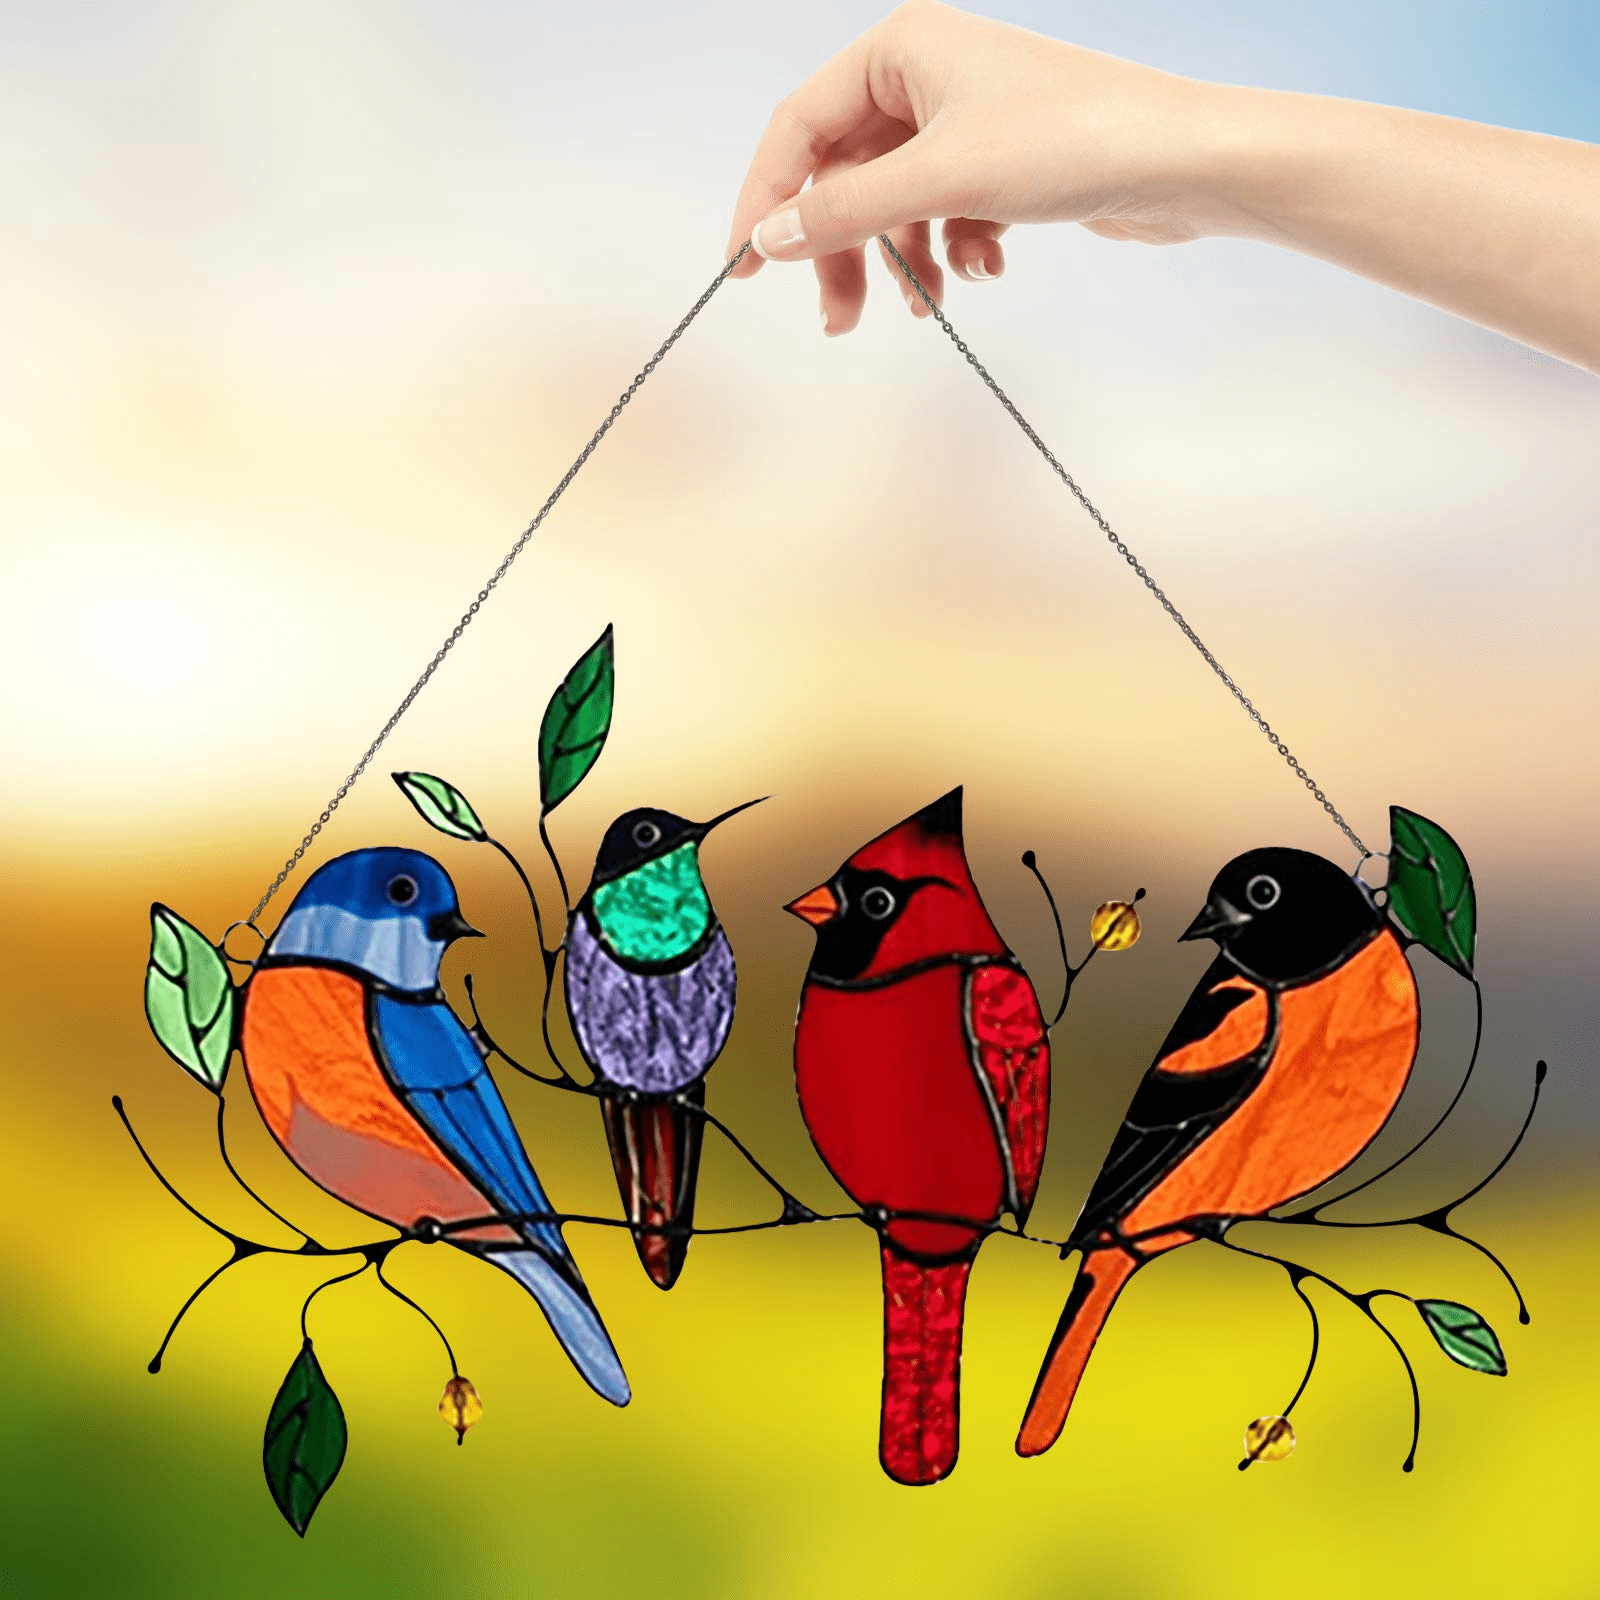 8 Birds in Stained Glass Window Panel Hanging Catcher for Windows Doors BNNG Stained Glass Window Hangings Birds-On-A-Wire Window Panel with Chain 9.84 x 3.93,Window Hangings Bird Suncatchers 